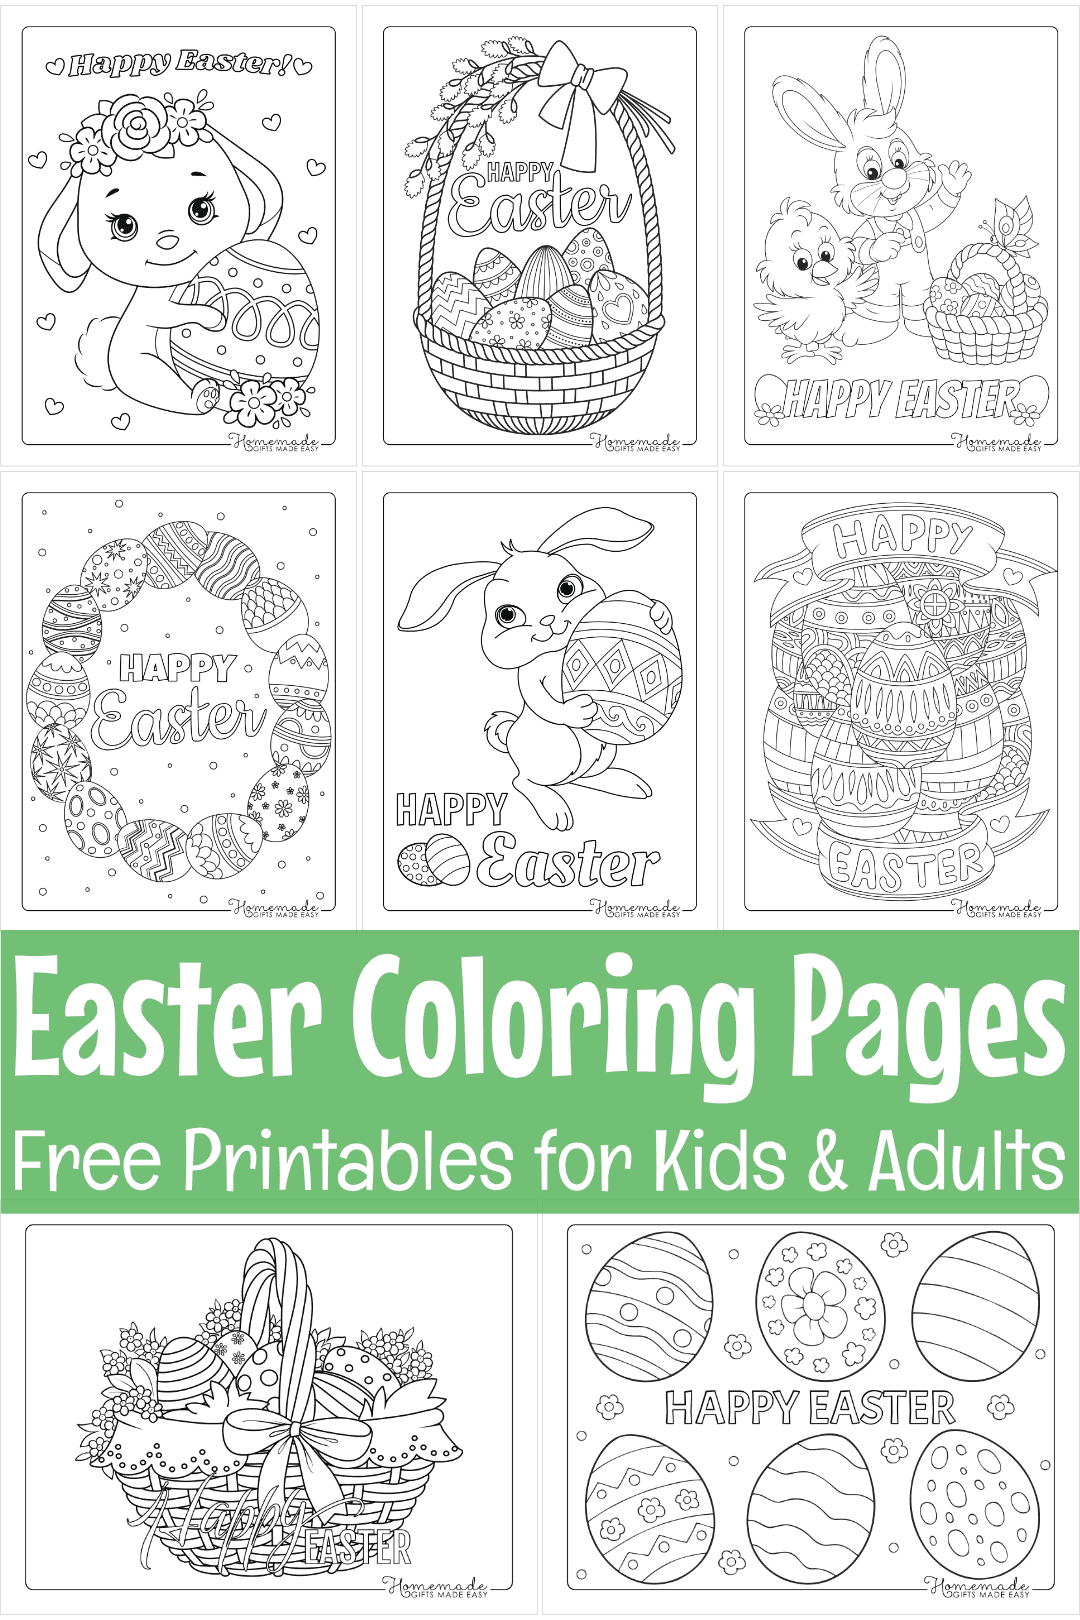 100 Easter Coloring Pages | 100 Free Printable PDFs